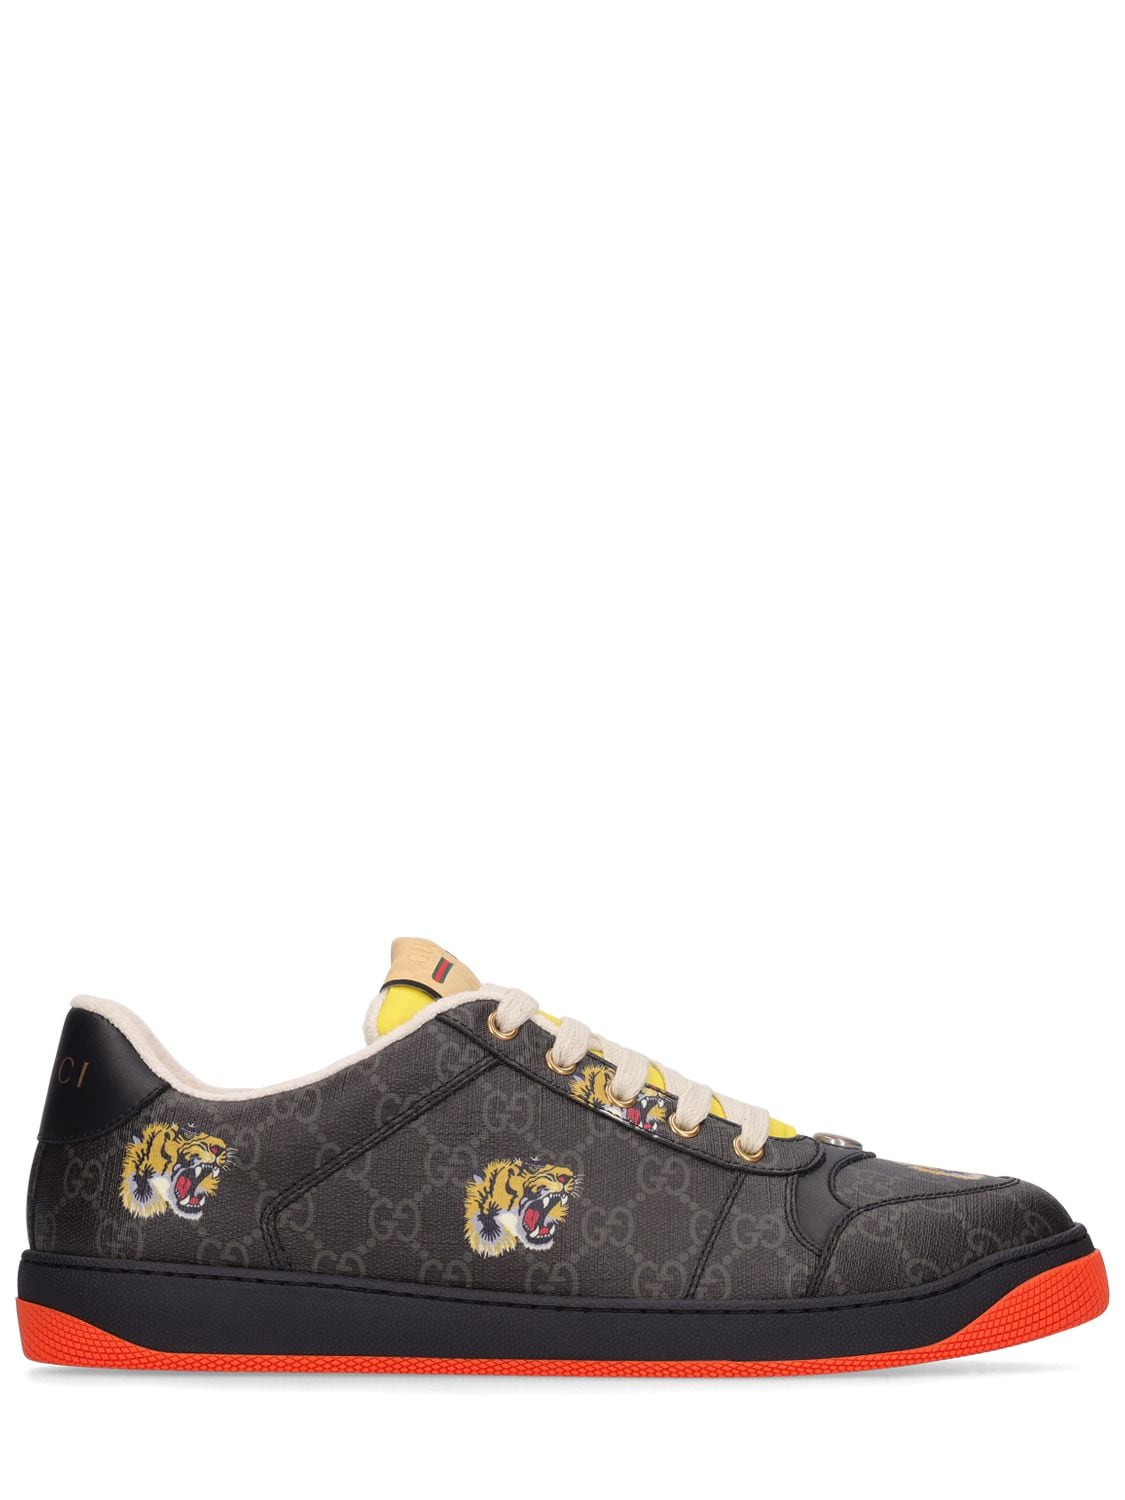 GUCCI Cotton Blend Sneakers